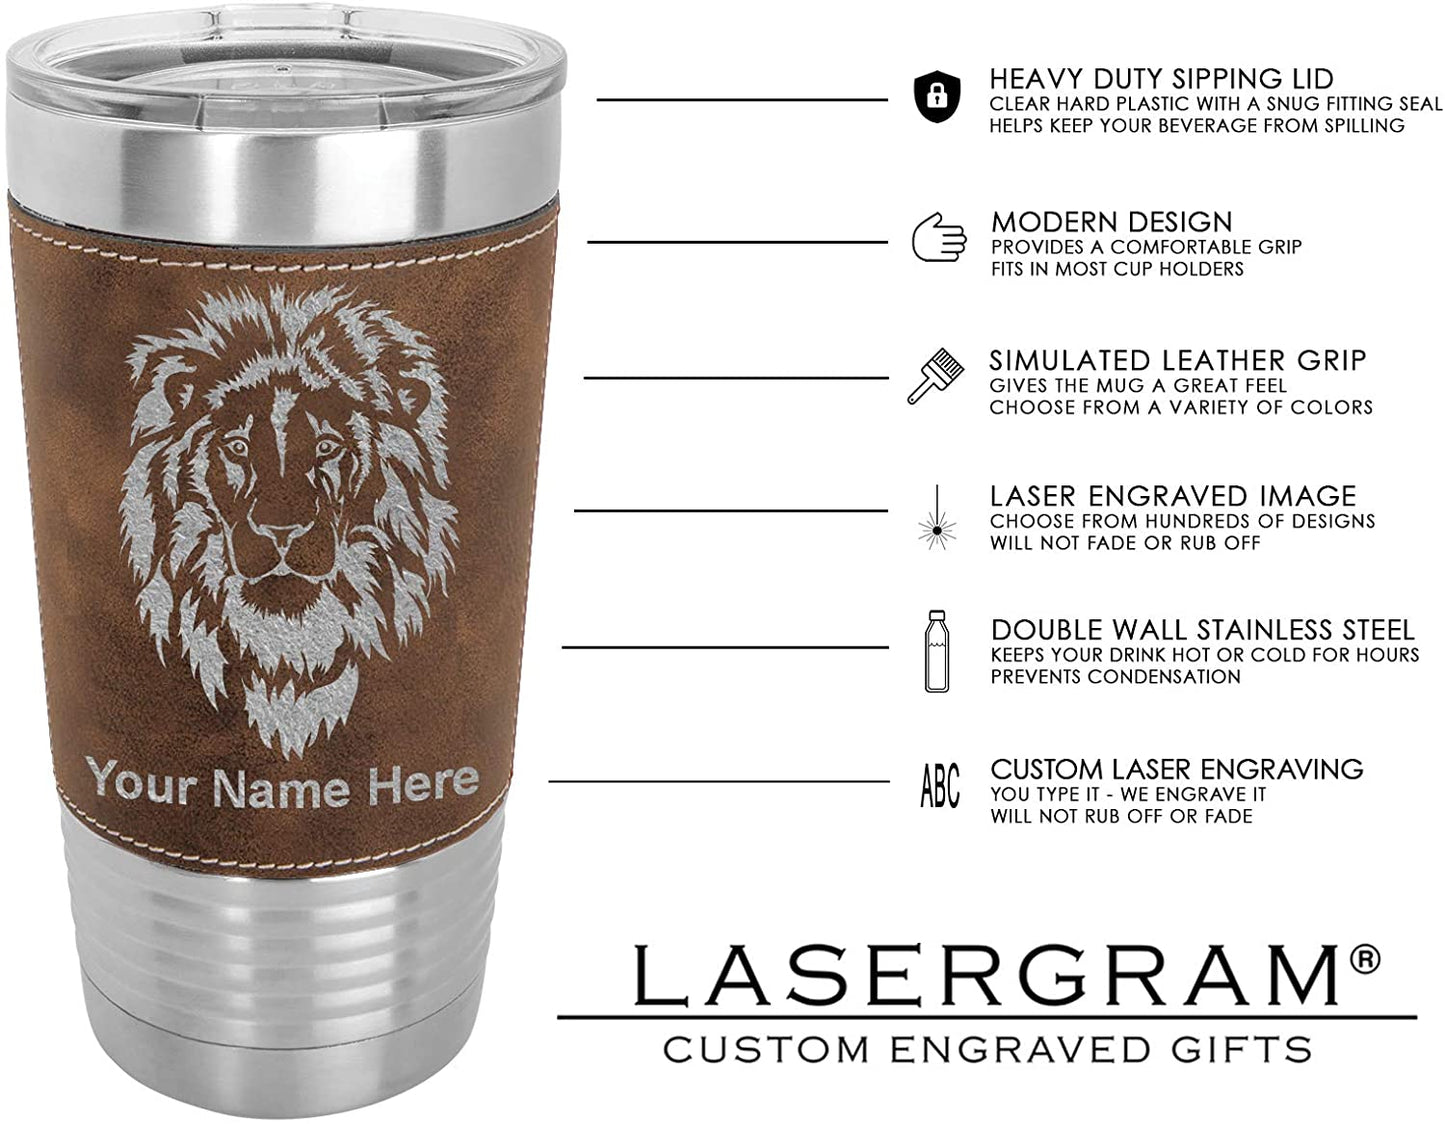 20oz Faux Leather Tumbler Mug, ST Surgical Technologist, Personalized Engraving Included